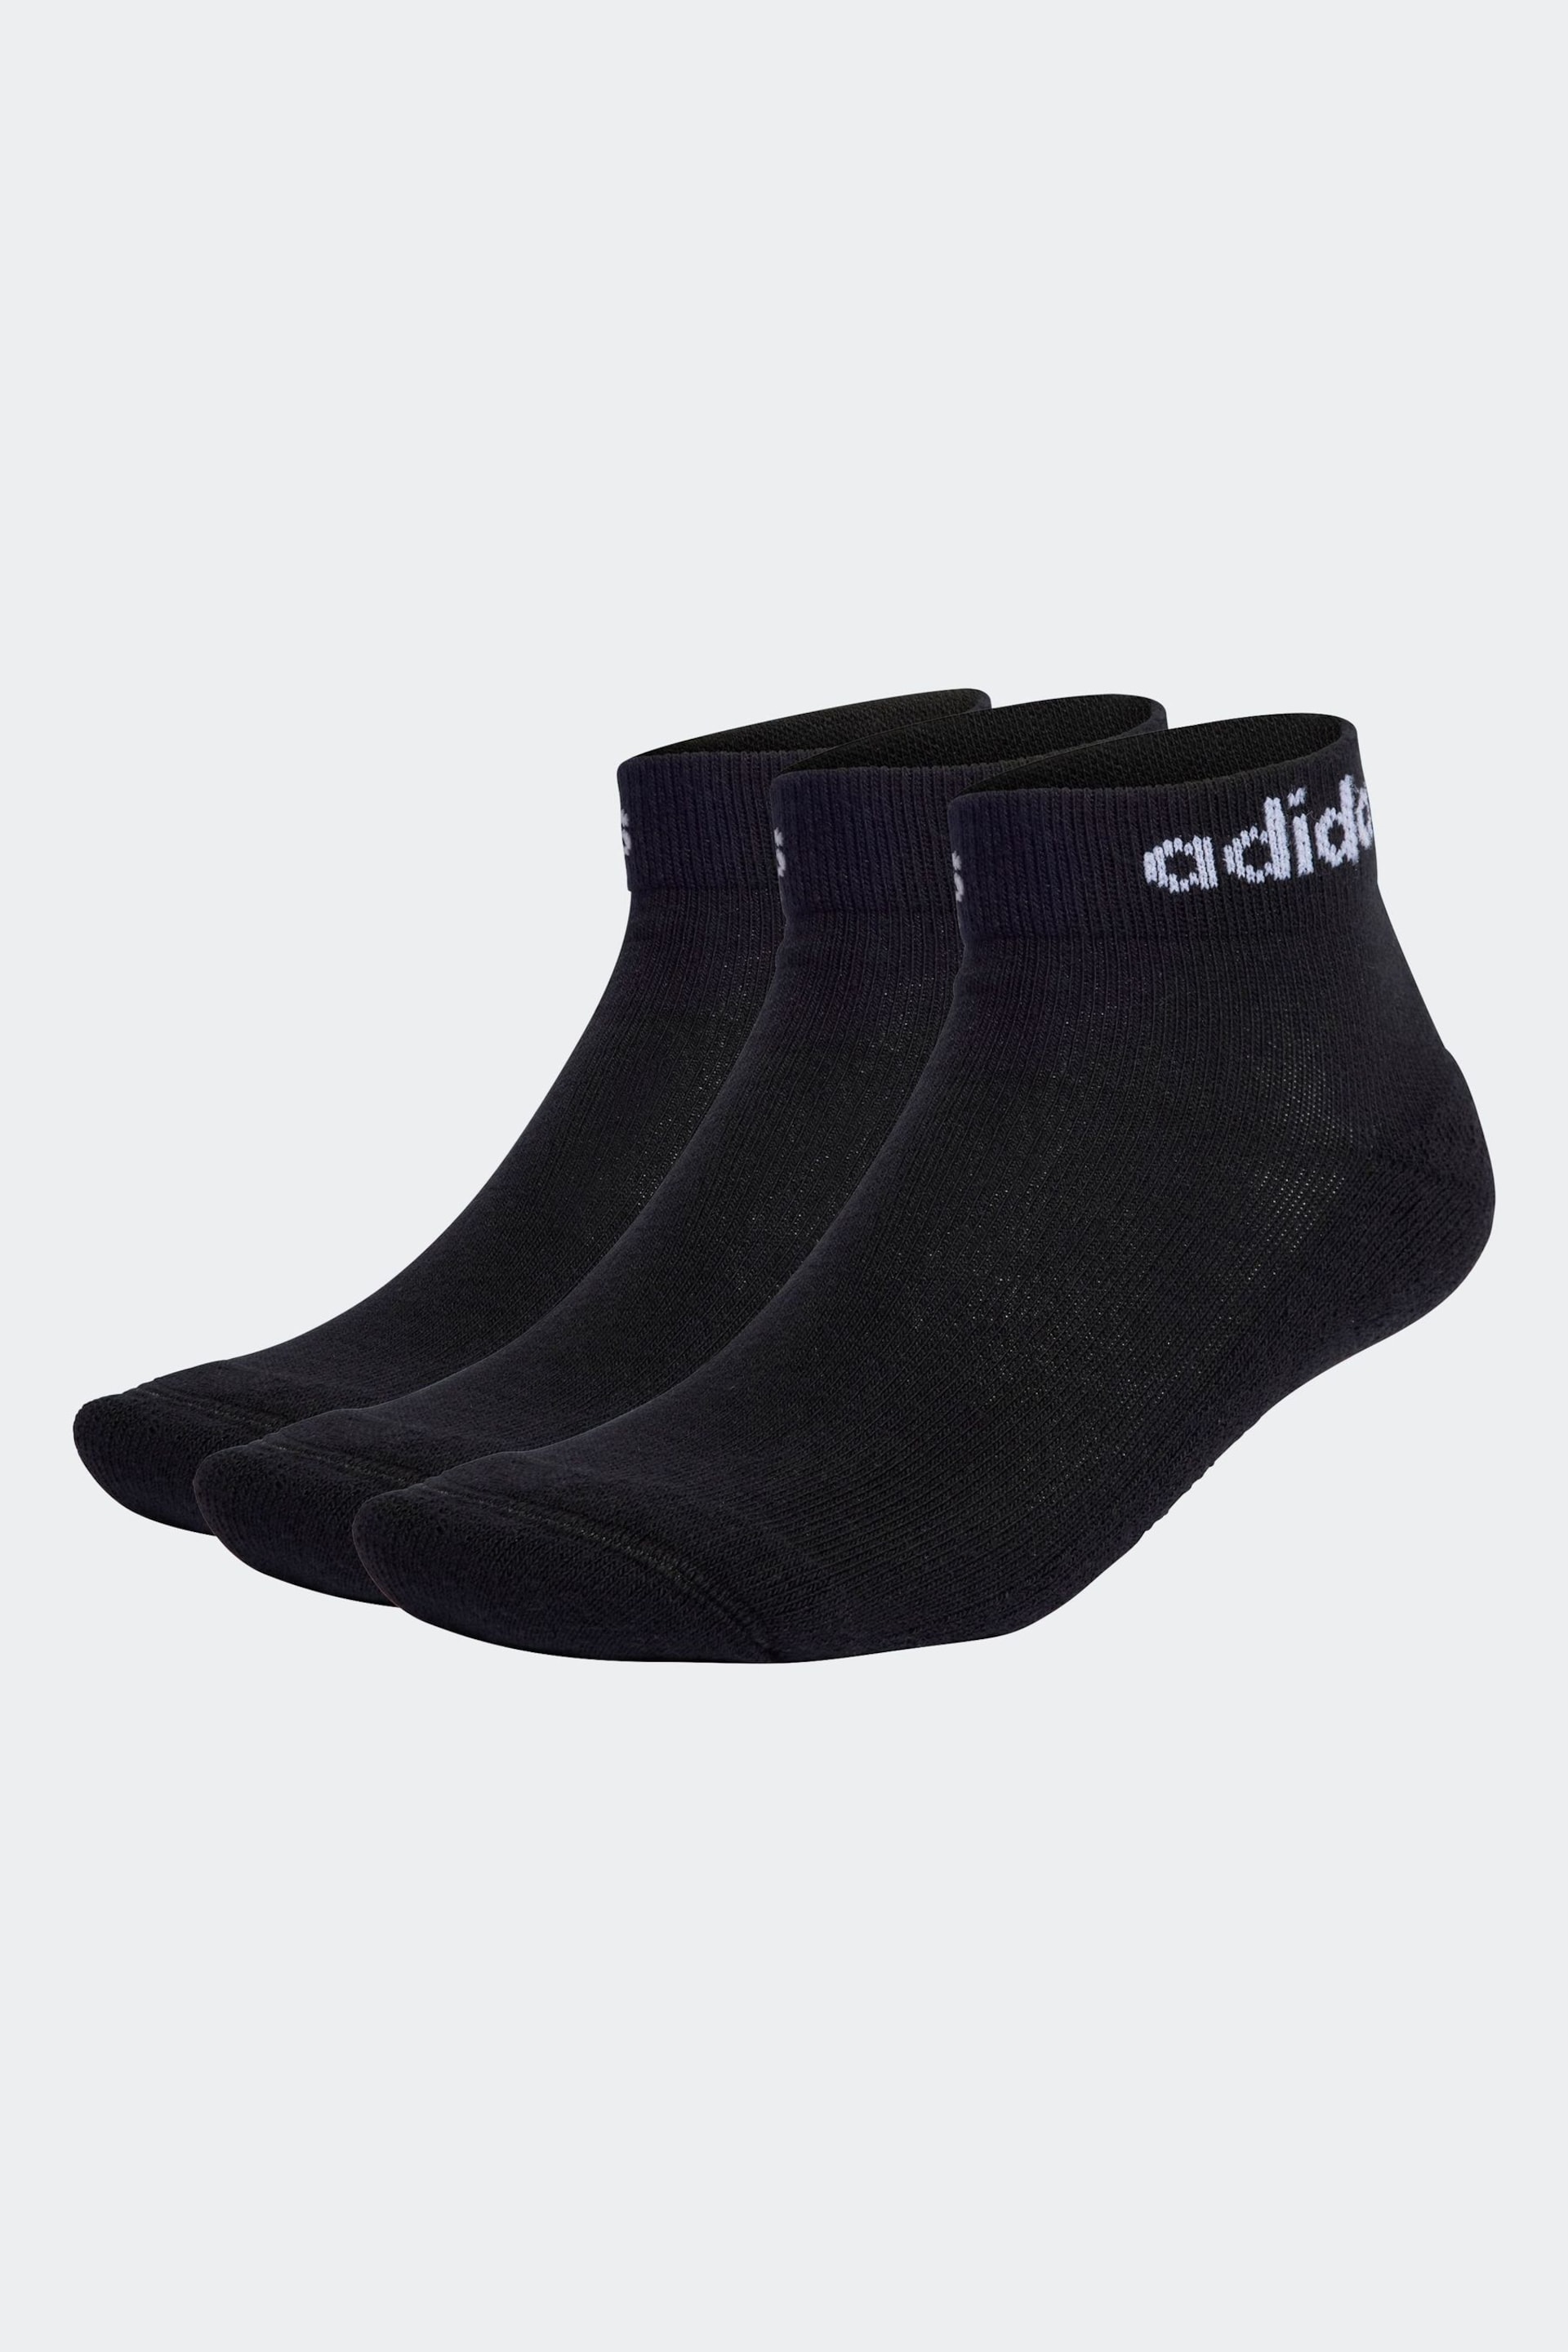 adidas Black Linear Ankle Cushioned Socks 3 Pairs - Image 1 of 1